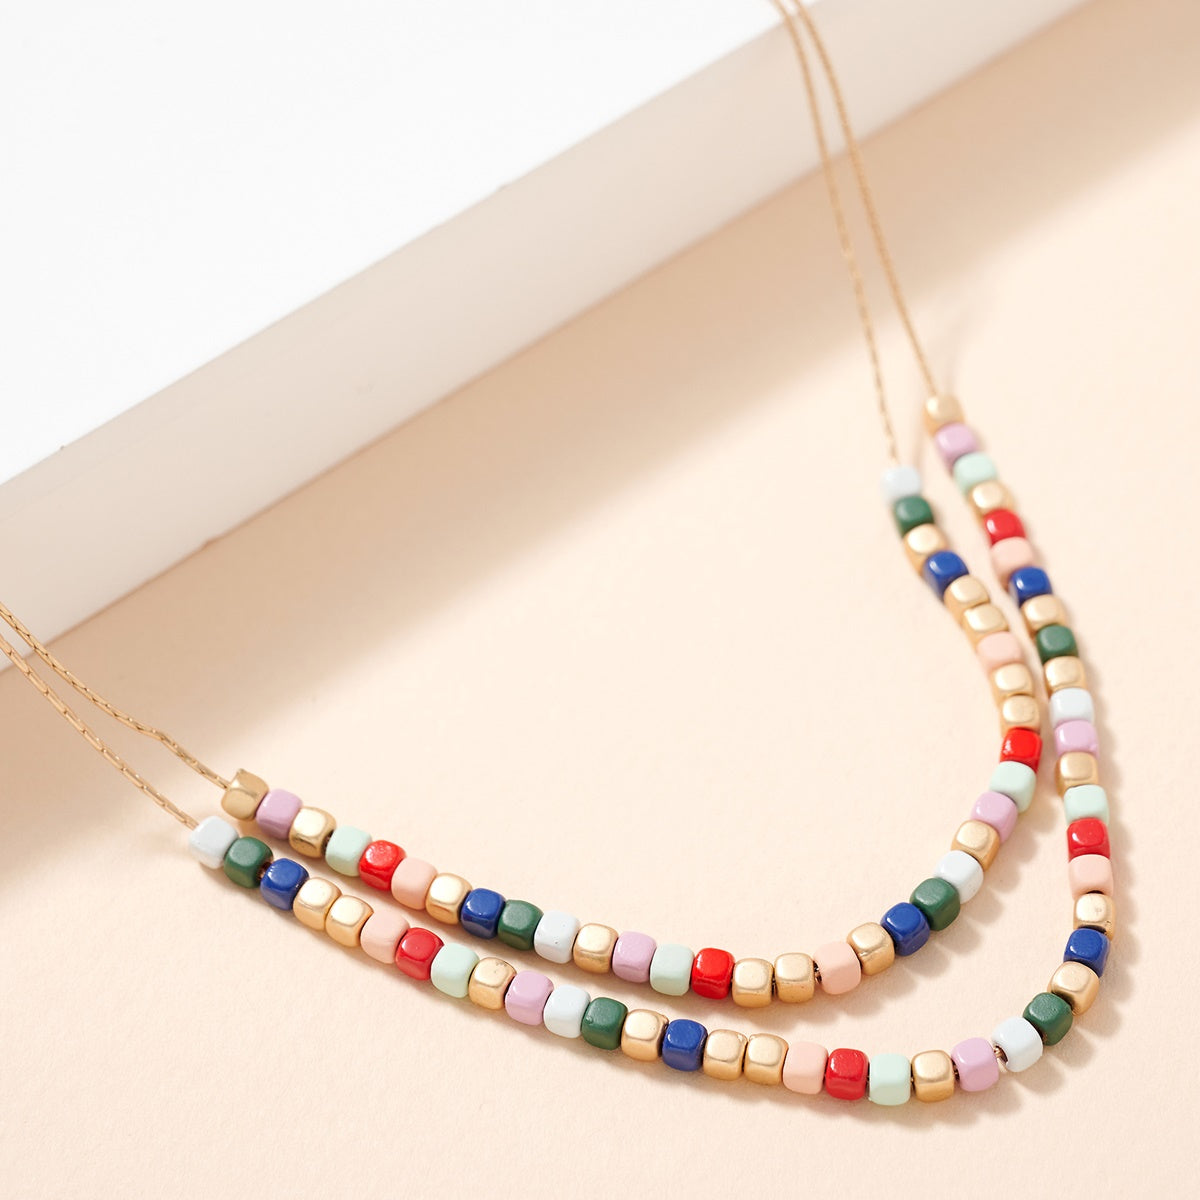 Double layered square bead necklace